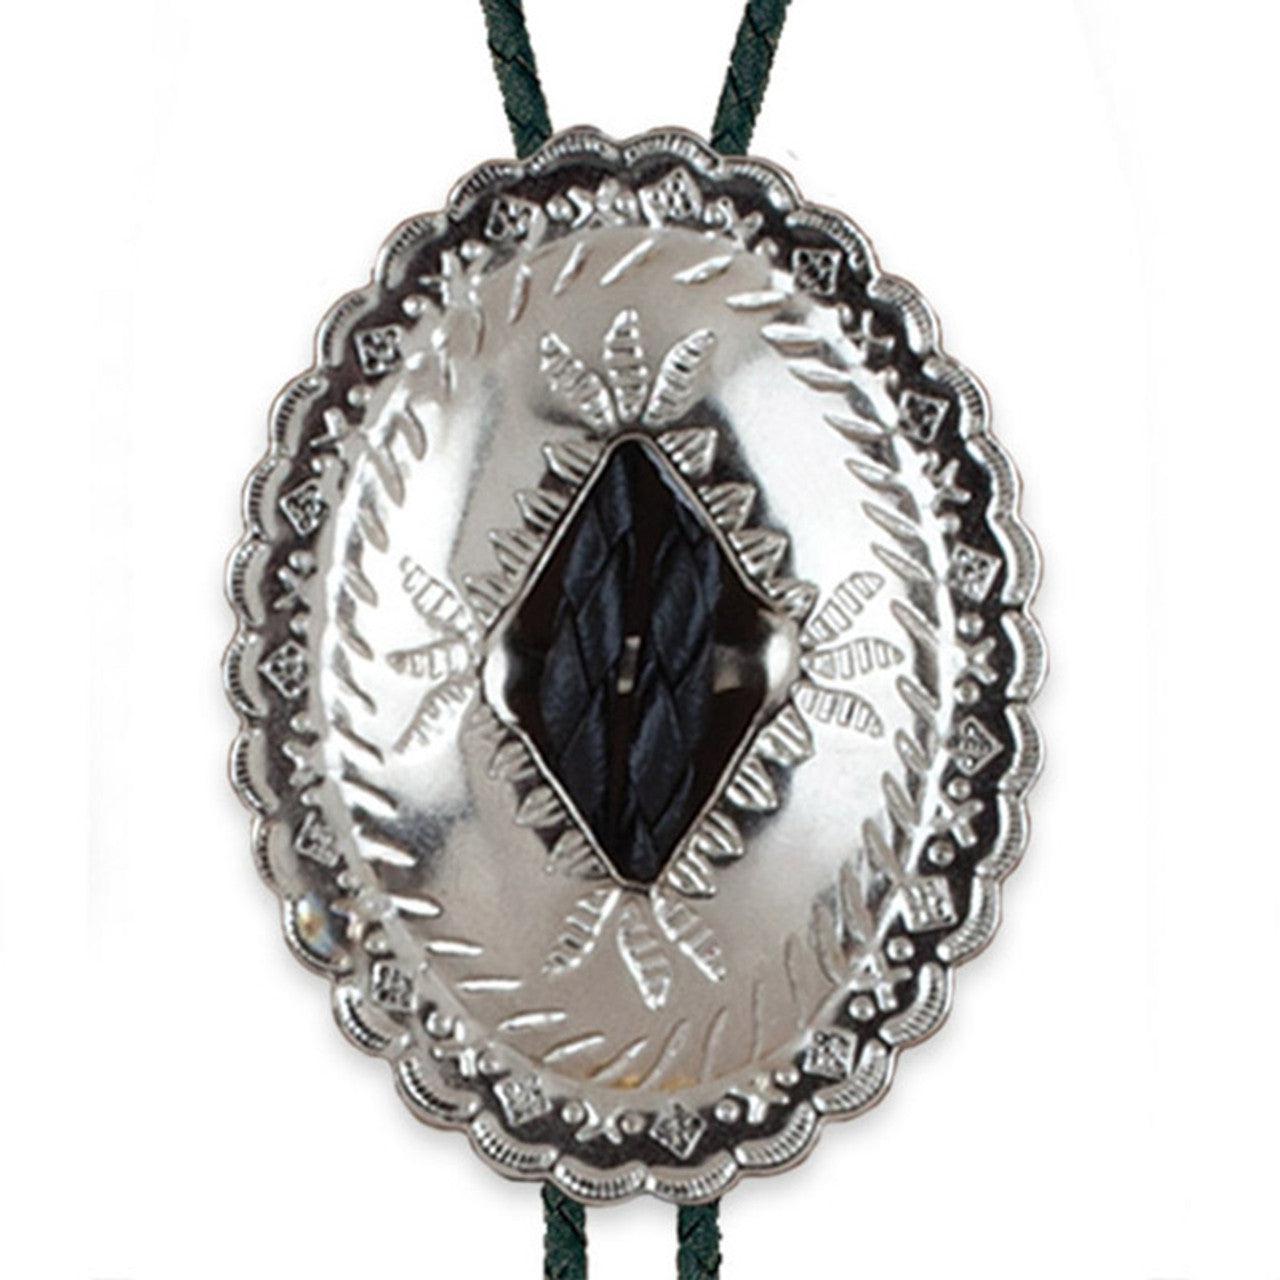 A showy Western Express silver concho bolo tie with a black stone, measures 2 inches wide, and is secured by a green cord.